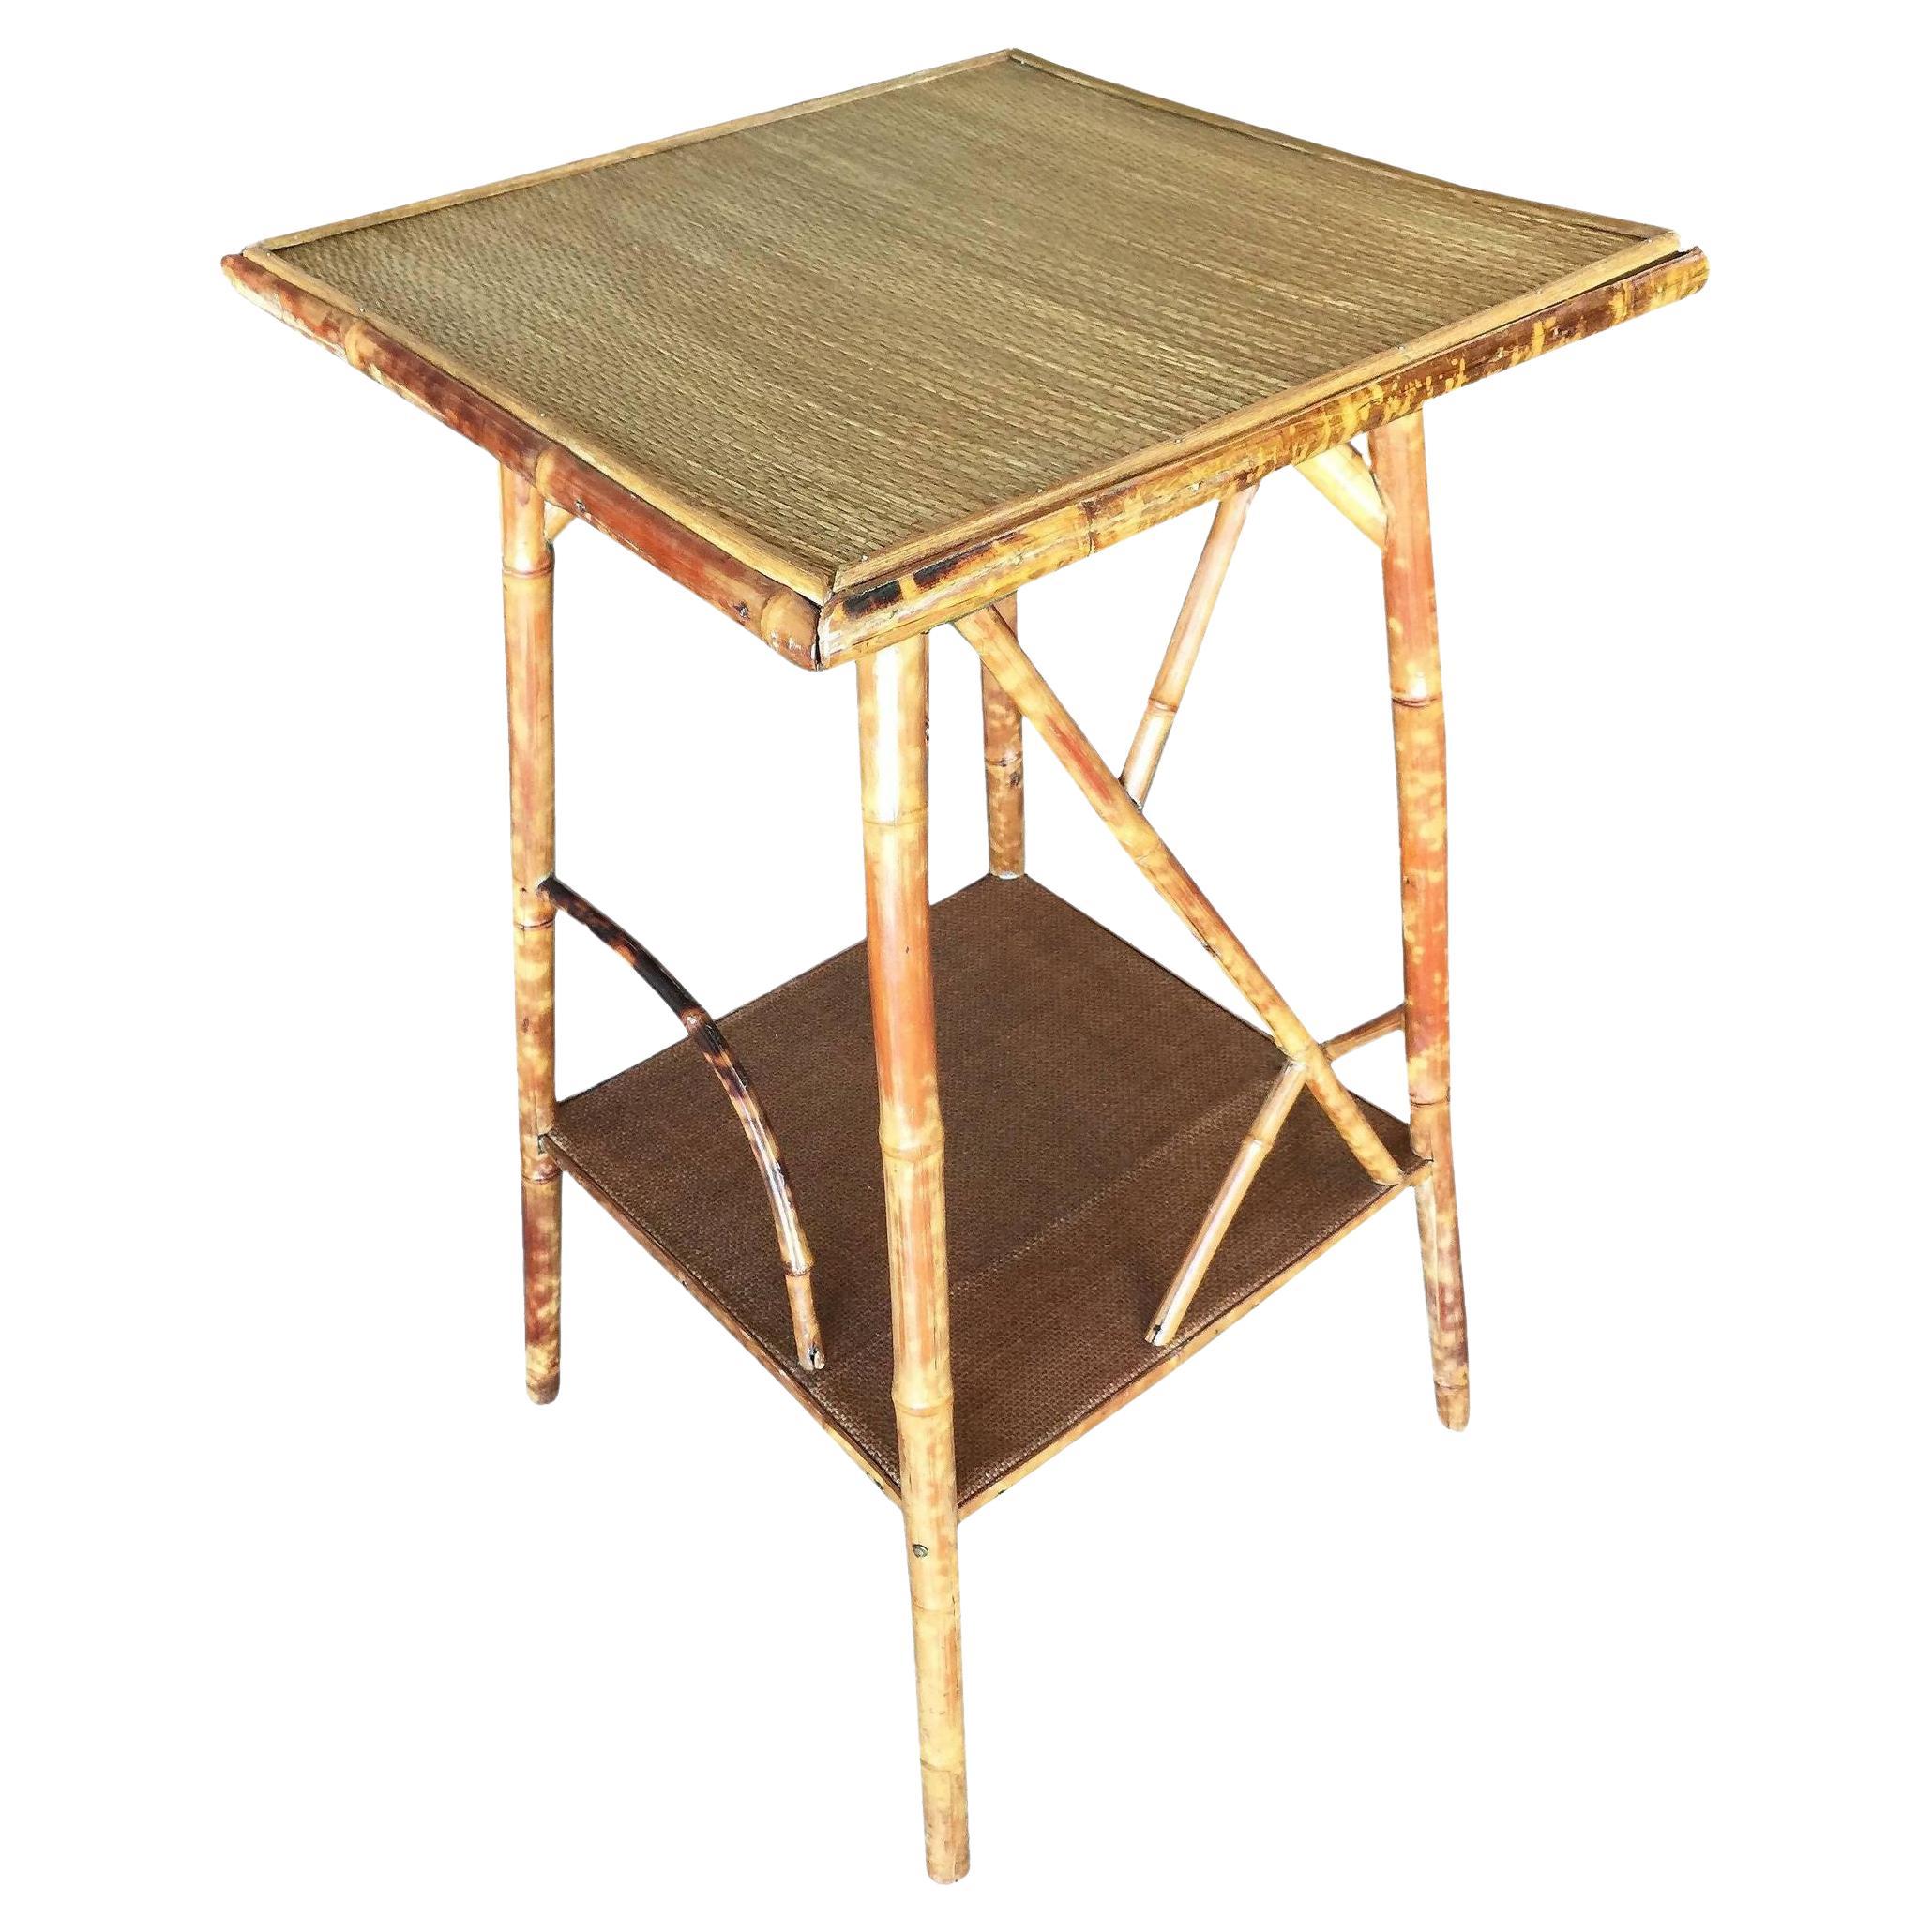 Restored Tiger Bamboo Tortoise Pedestal Side Table W/ Organic Formed Accents For Sale